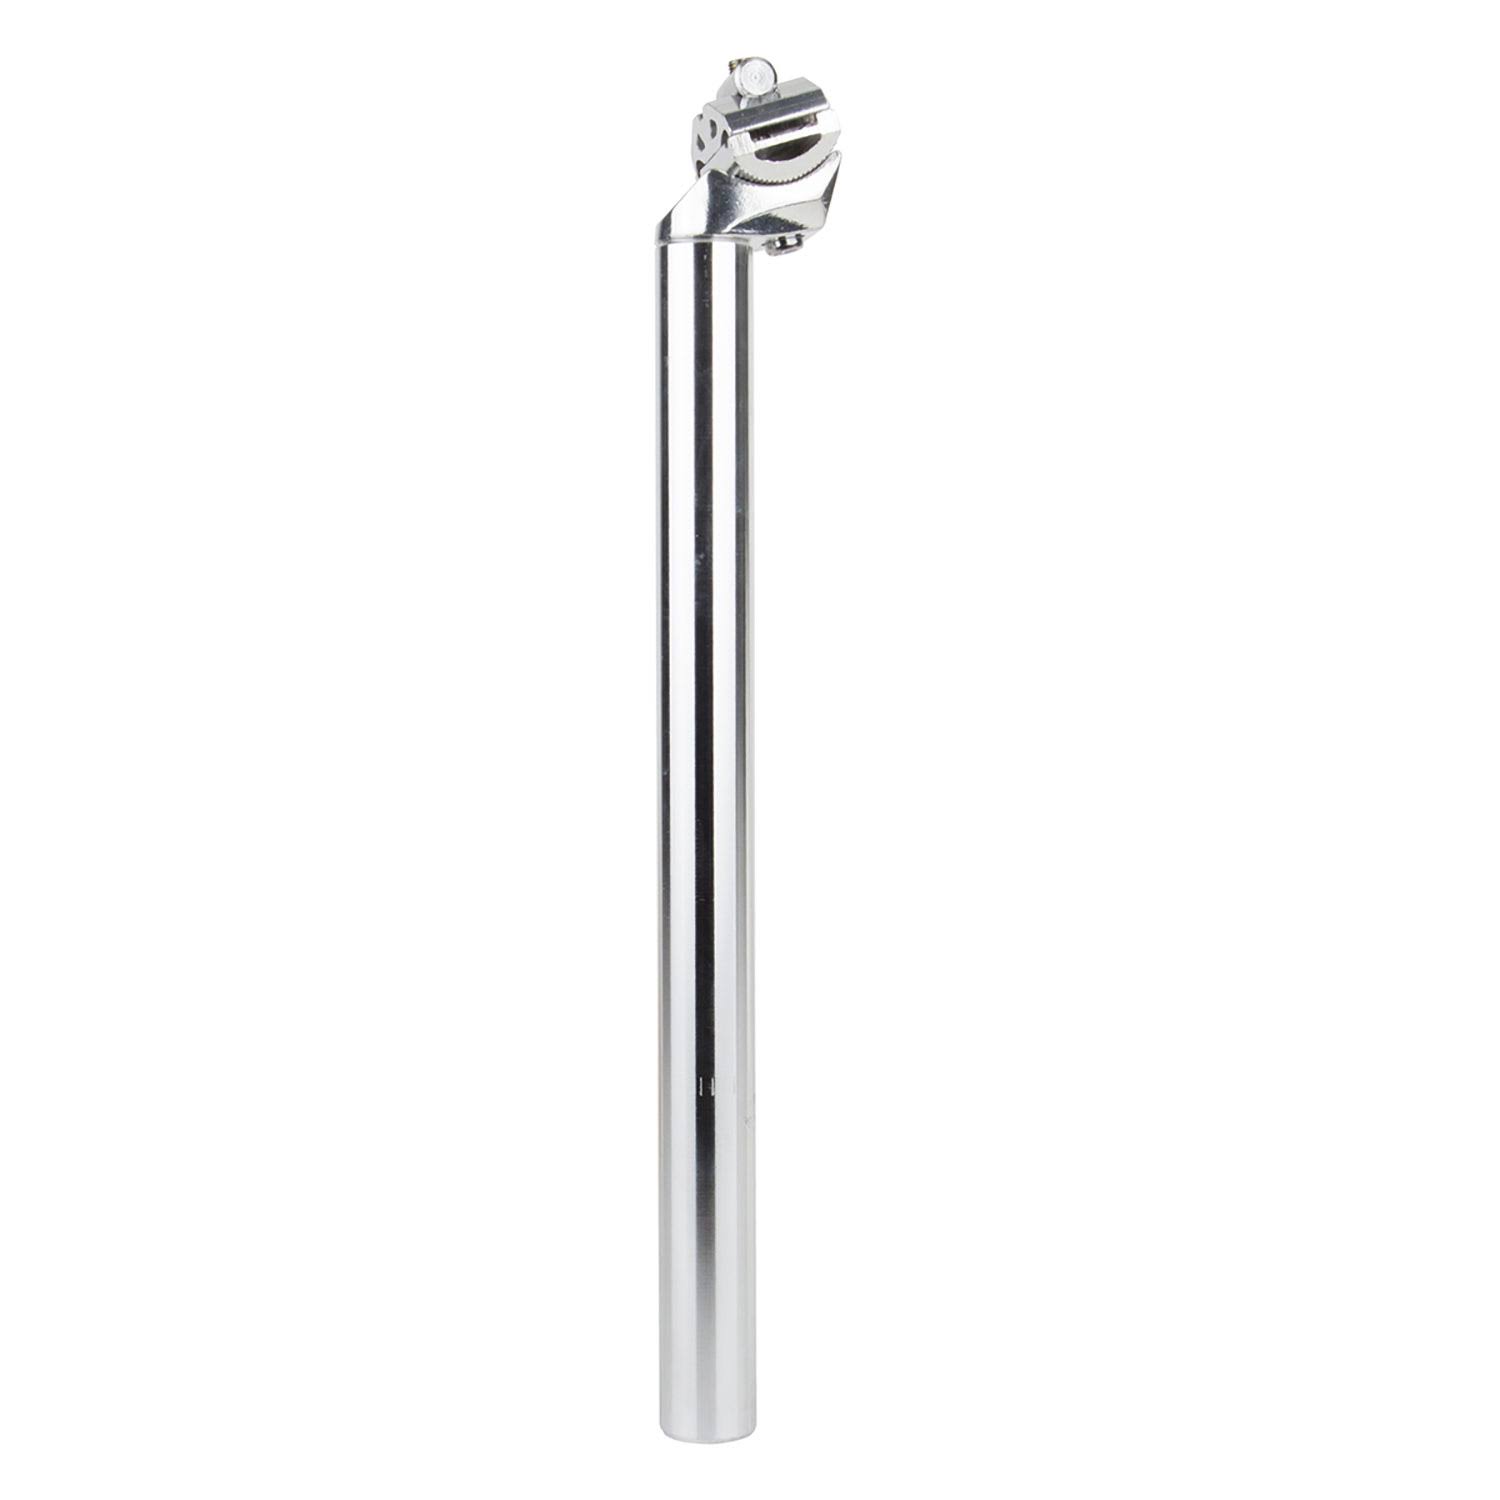 Sunlite Classic Alloy Seat Post - with Clamp, 350mm, Silver, 27.0 x 350mm